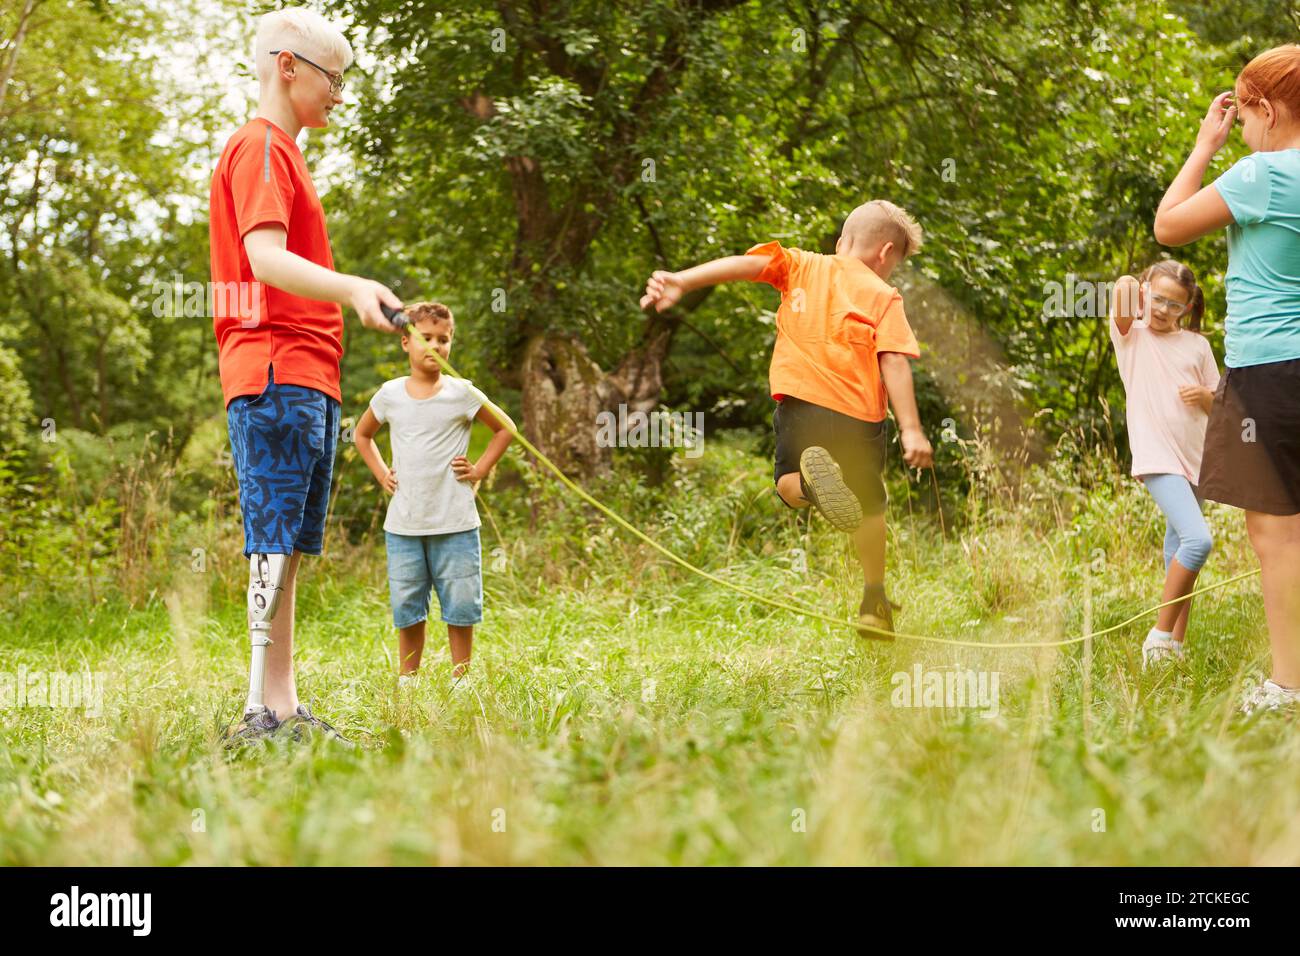 Rear view of boy jumping over skipping rope while playing with friends at park Stock Photo